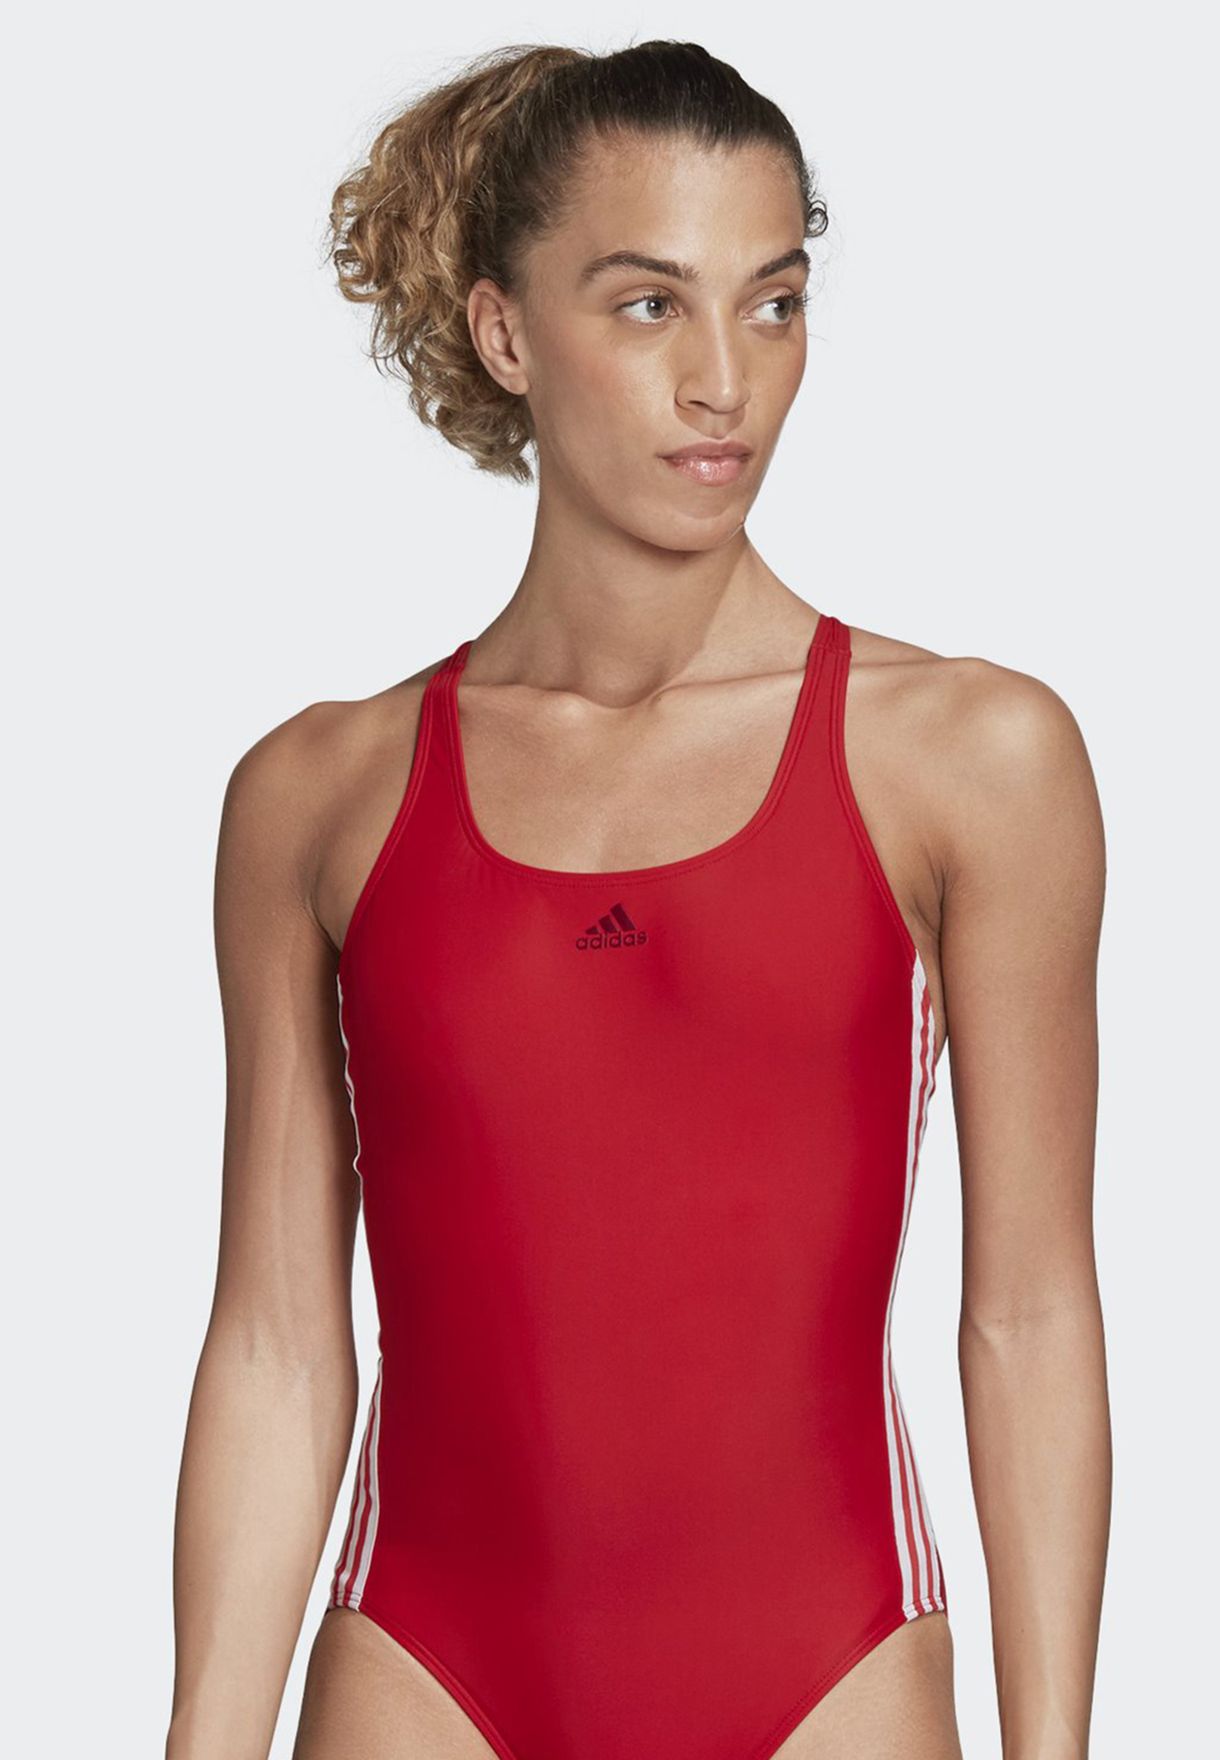 adidas bathing suits womens